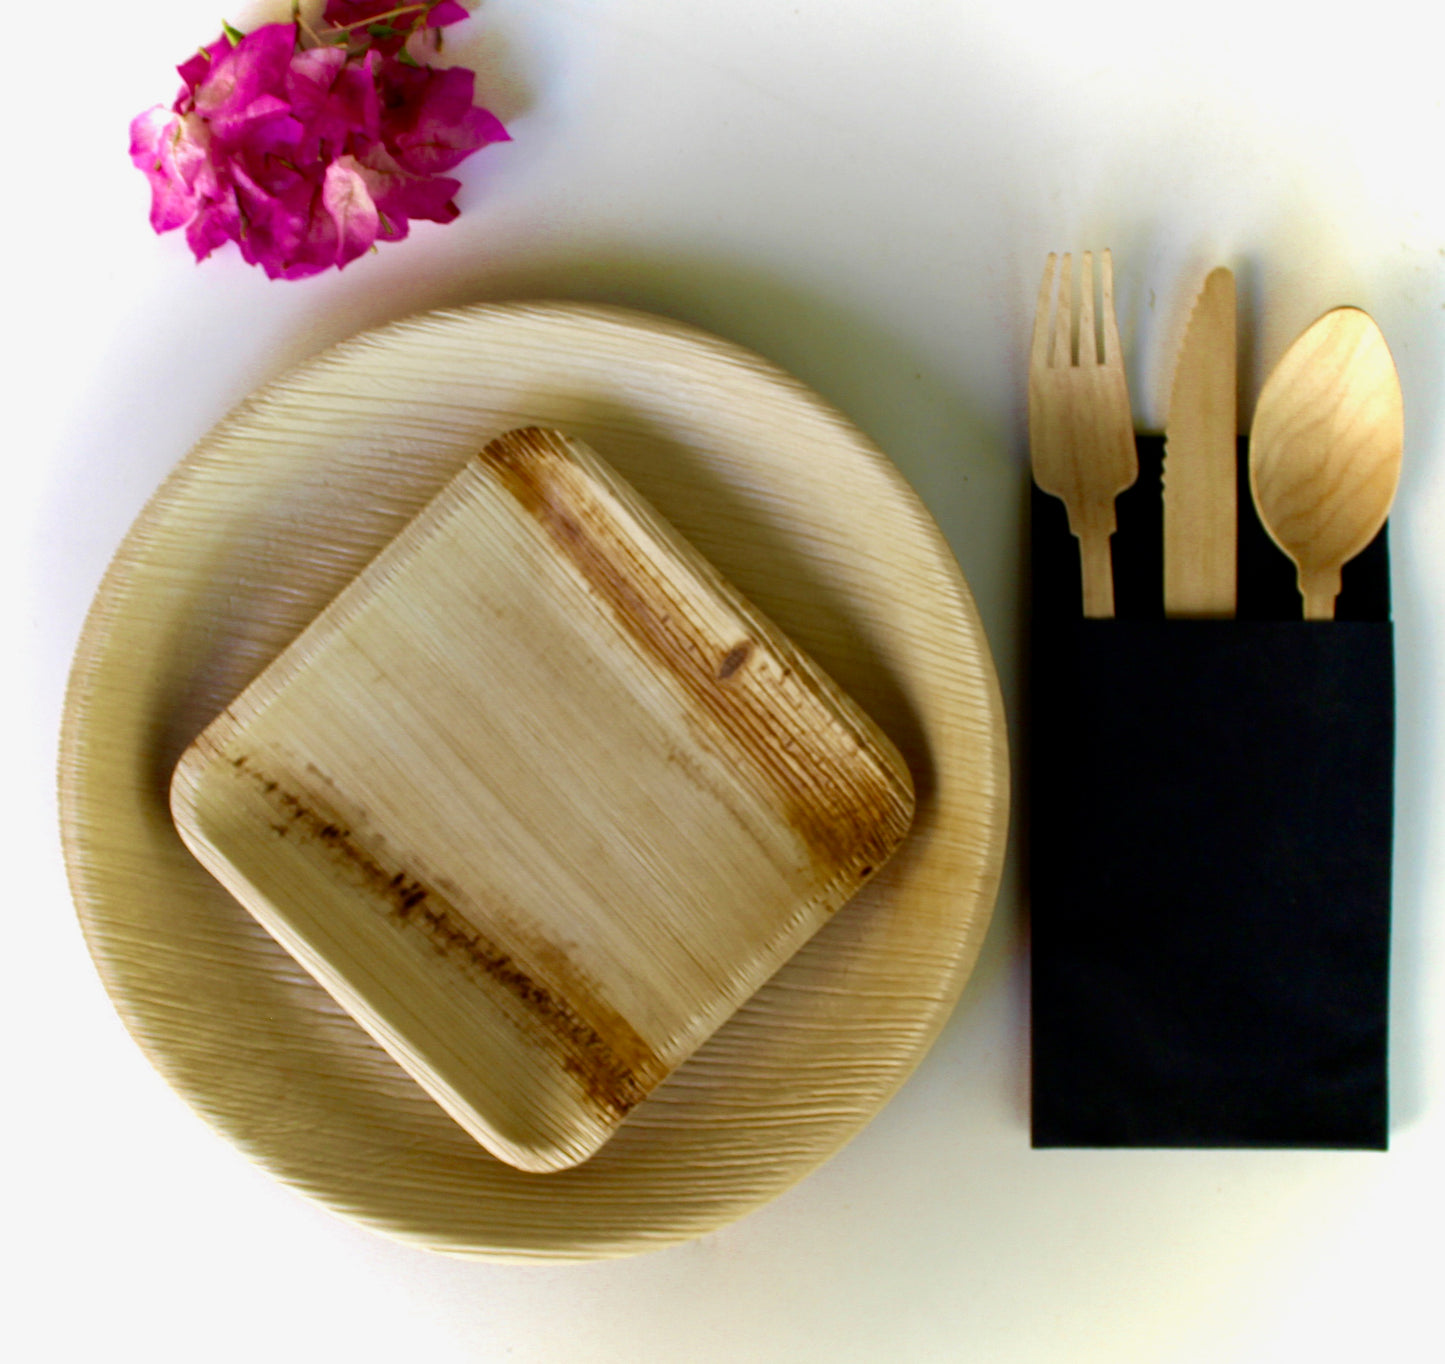 Palm Leaf plates 10 Pice 10" Round  - 10 pic 6" square  - 30 Pic cutlery  and 10 pice Napkin